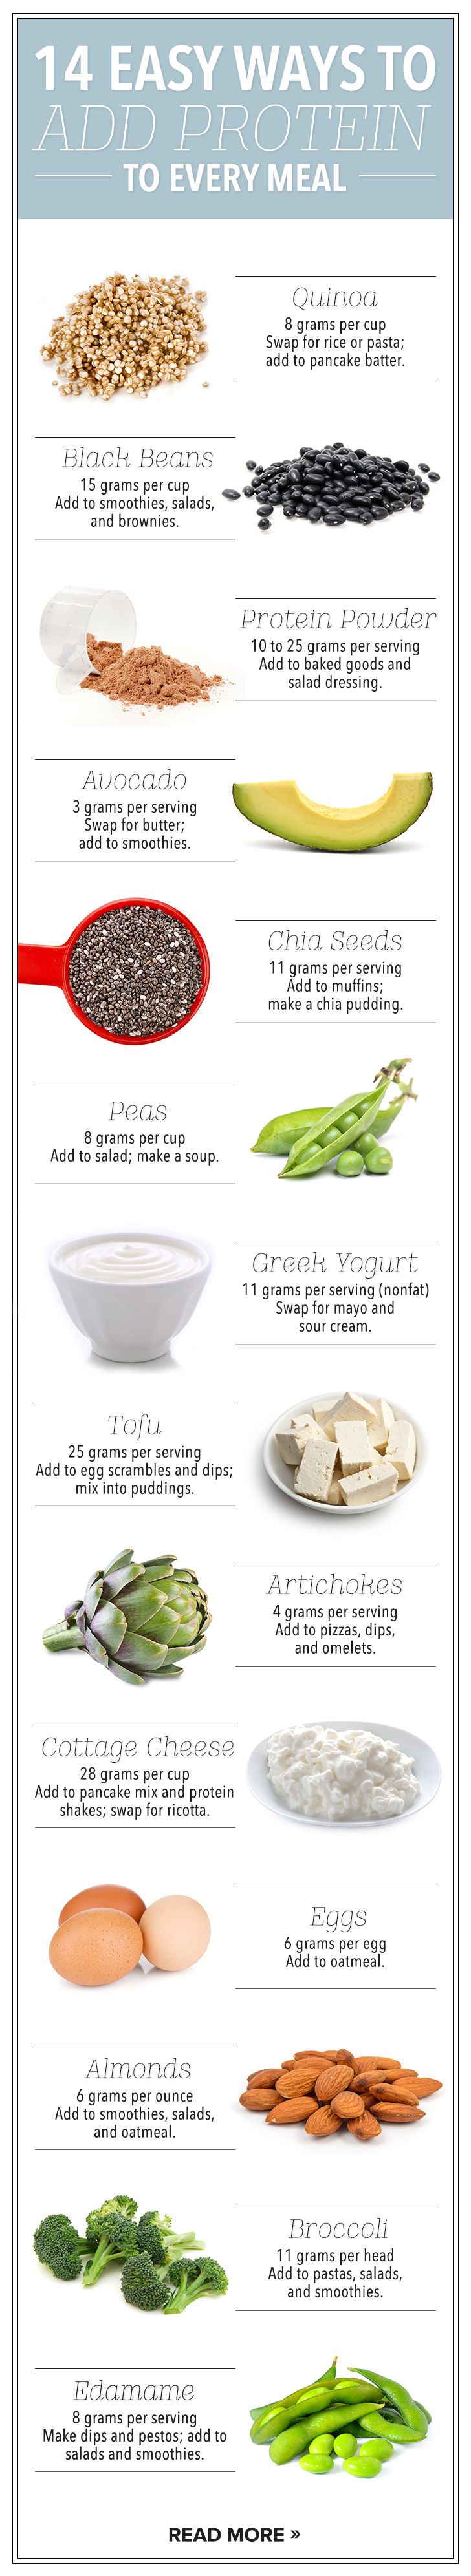 14-ways-to-add-protein-to-your-meal